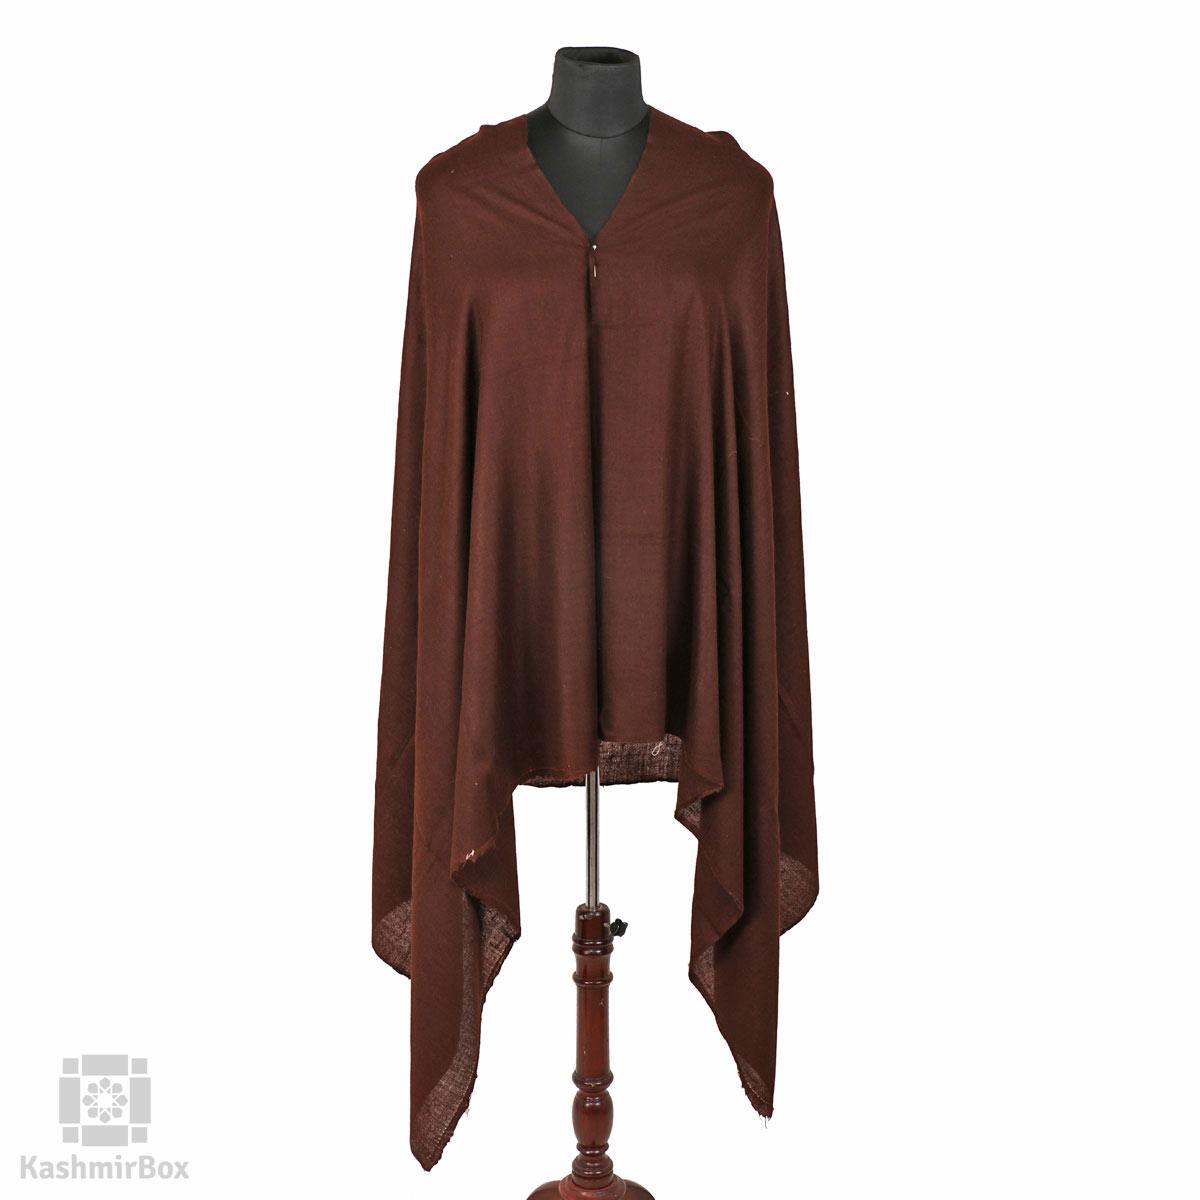 Hickory Brown Solid Styled Cashmere Pashmina Shawl - Kashmir Box